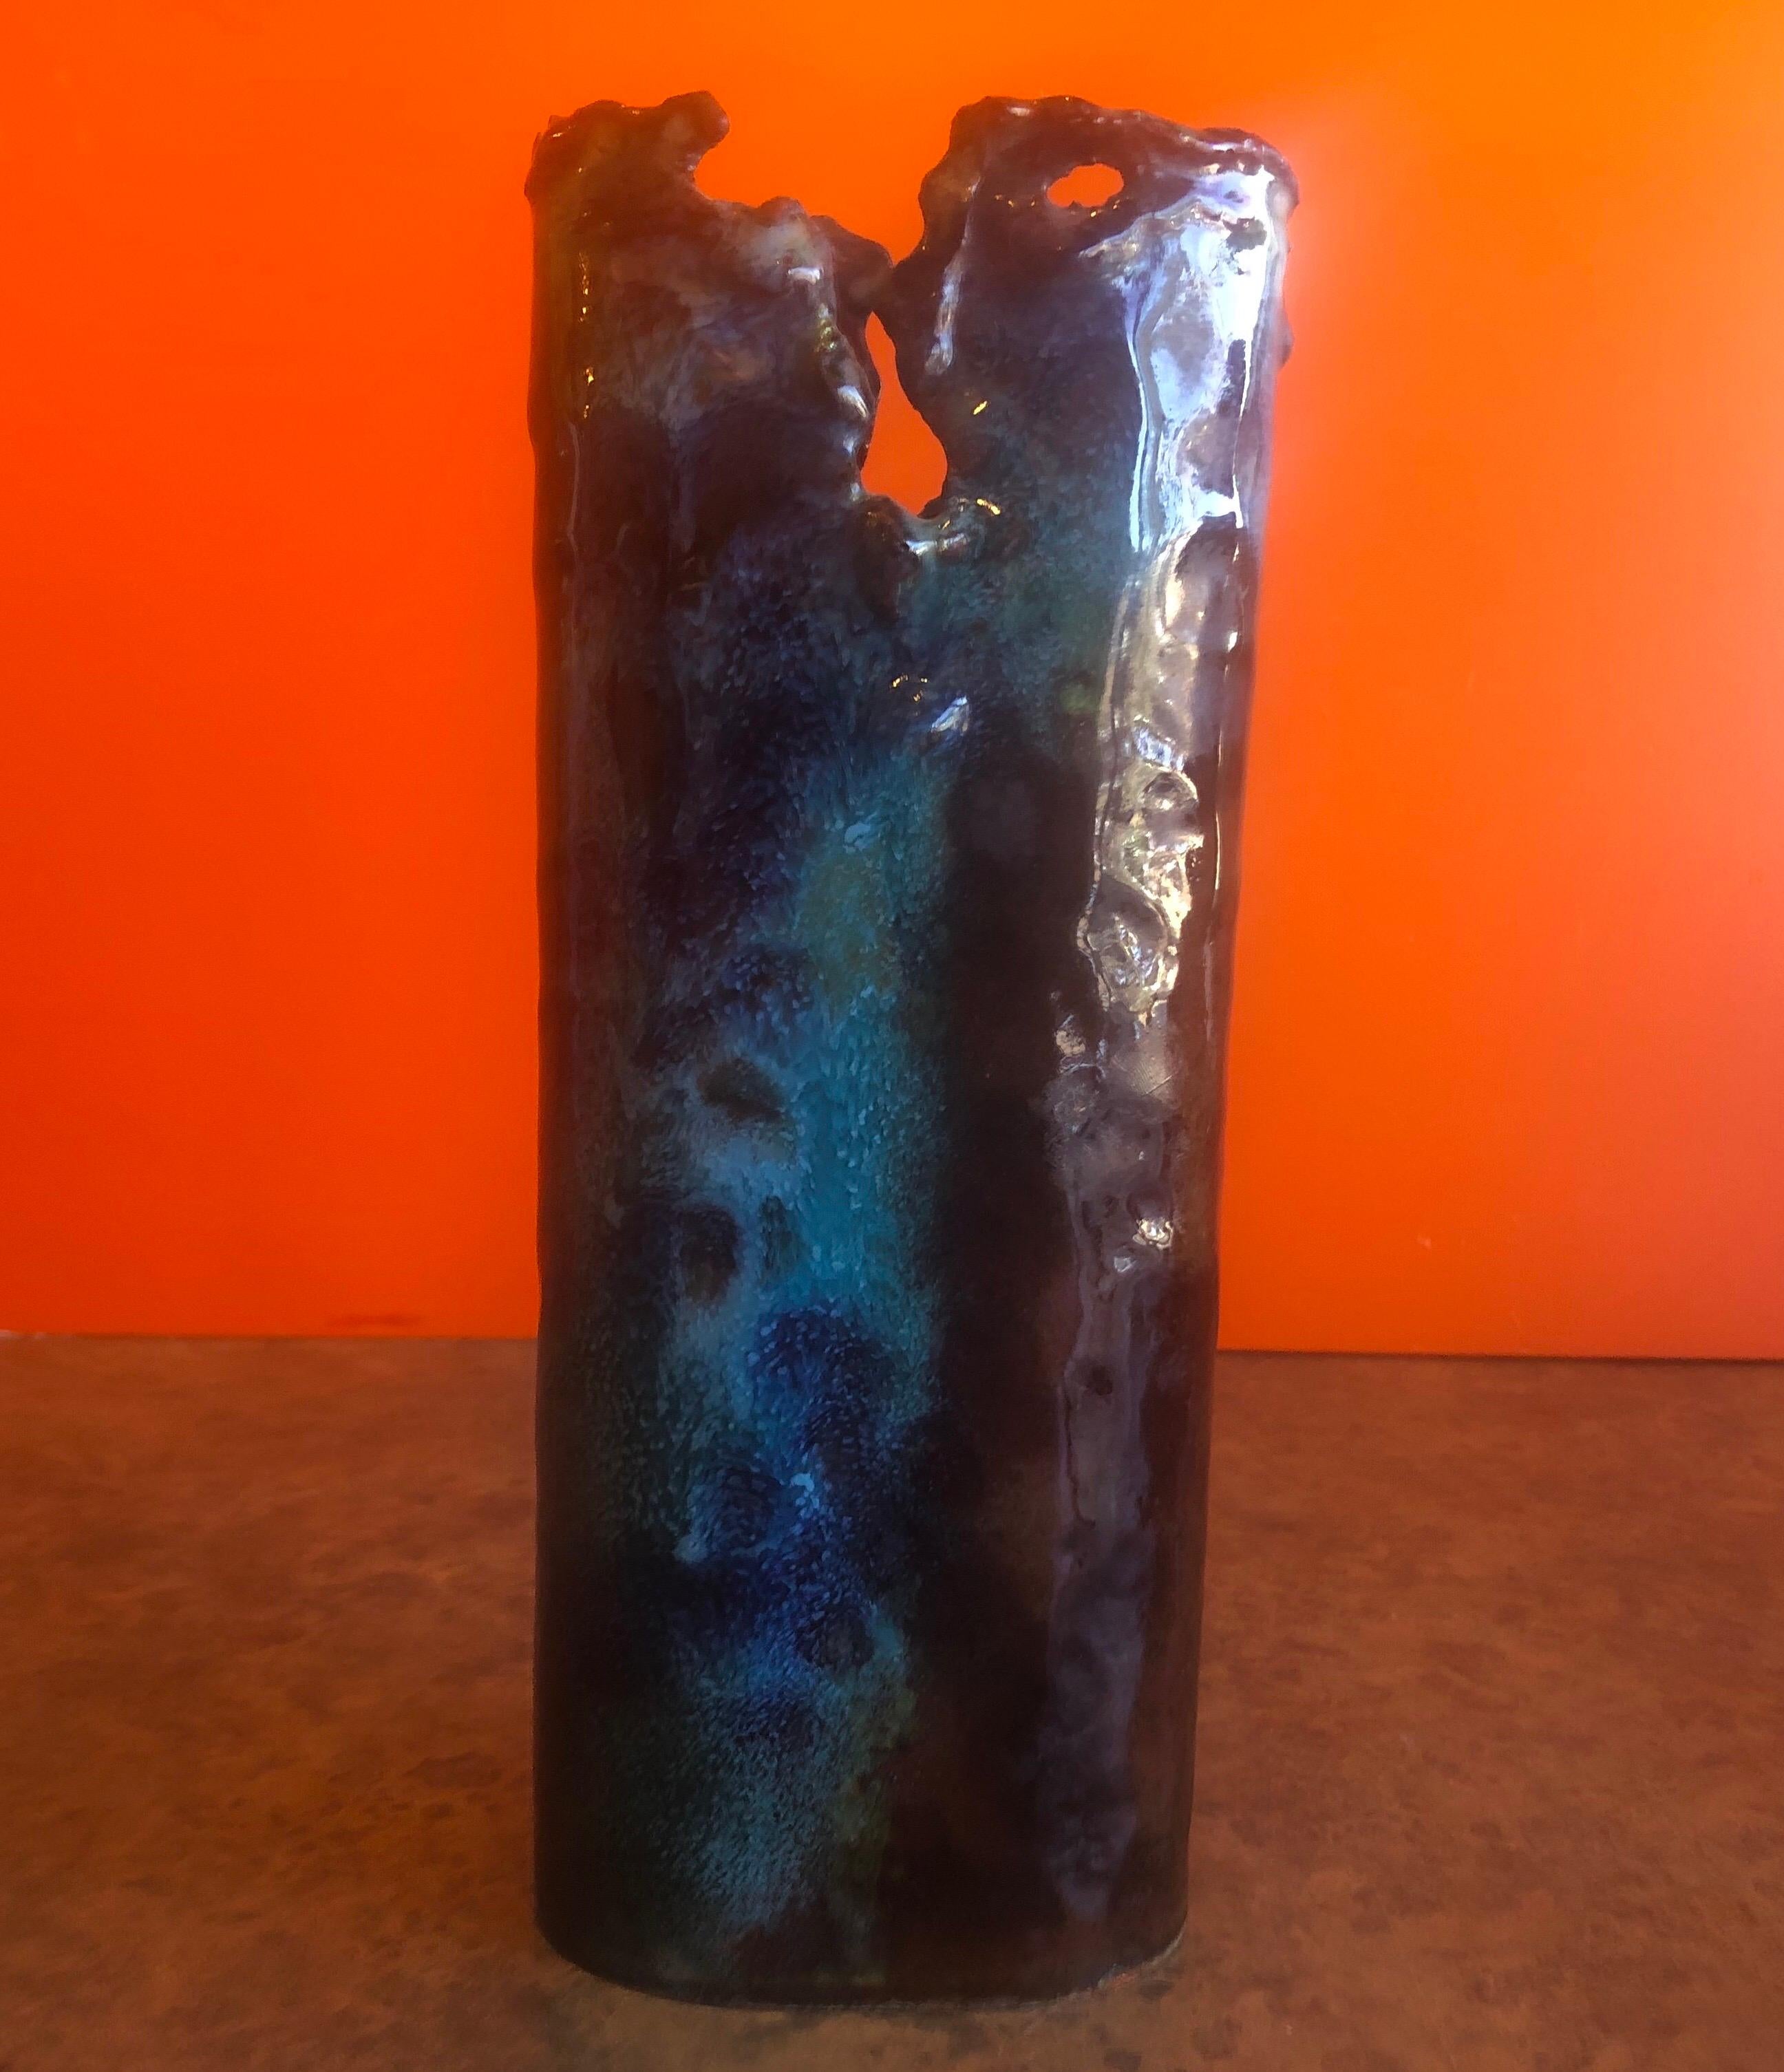 Brutalist copper vase with blue and brown enamel overlays by Rita Brierton, circa 1991. The vase is very heavy and finely crafted; the piece measures: 3.5